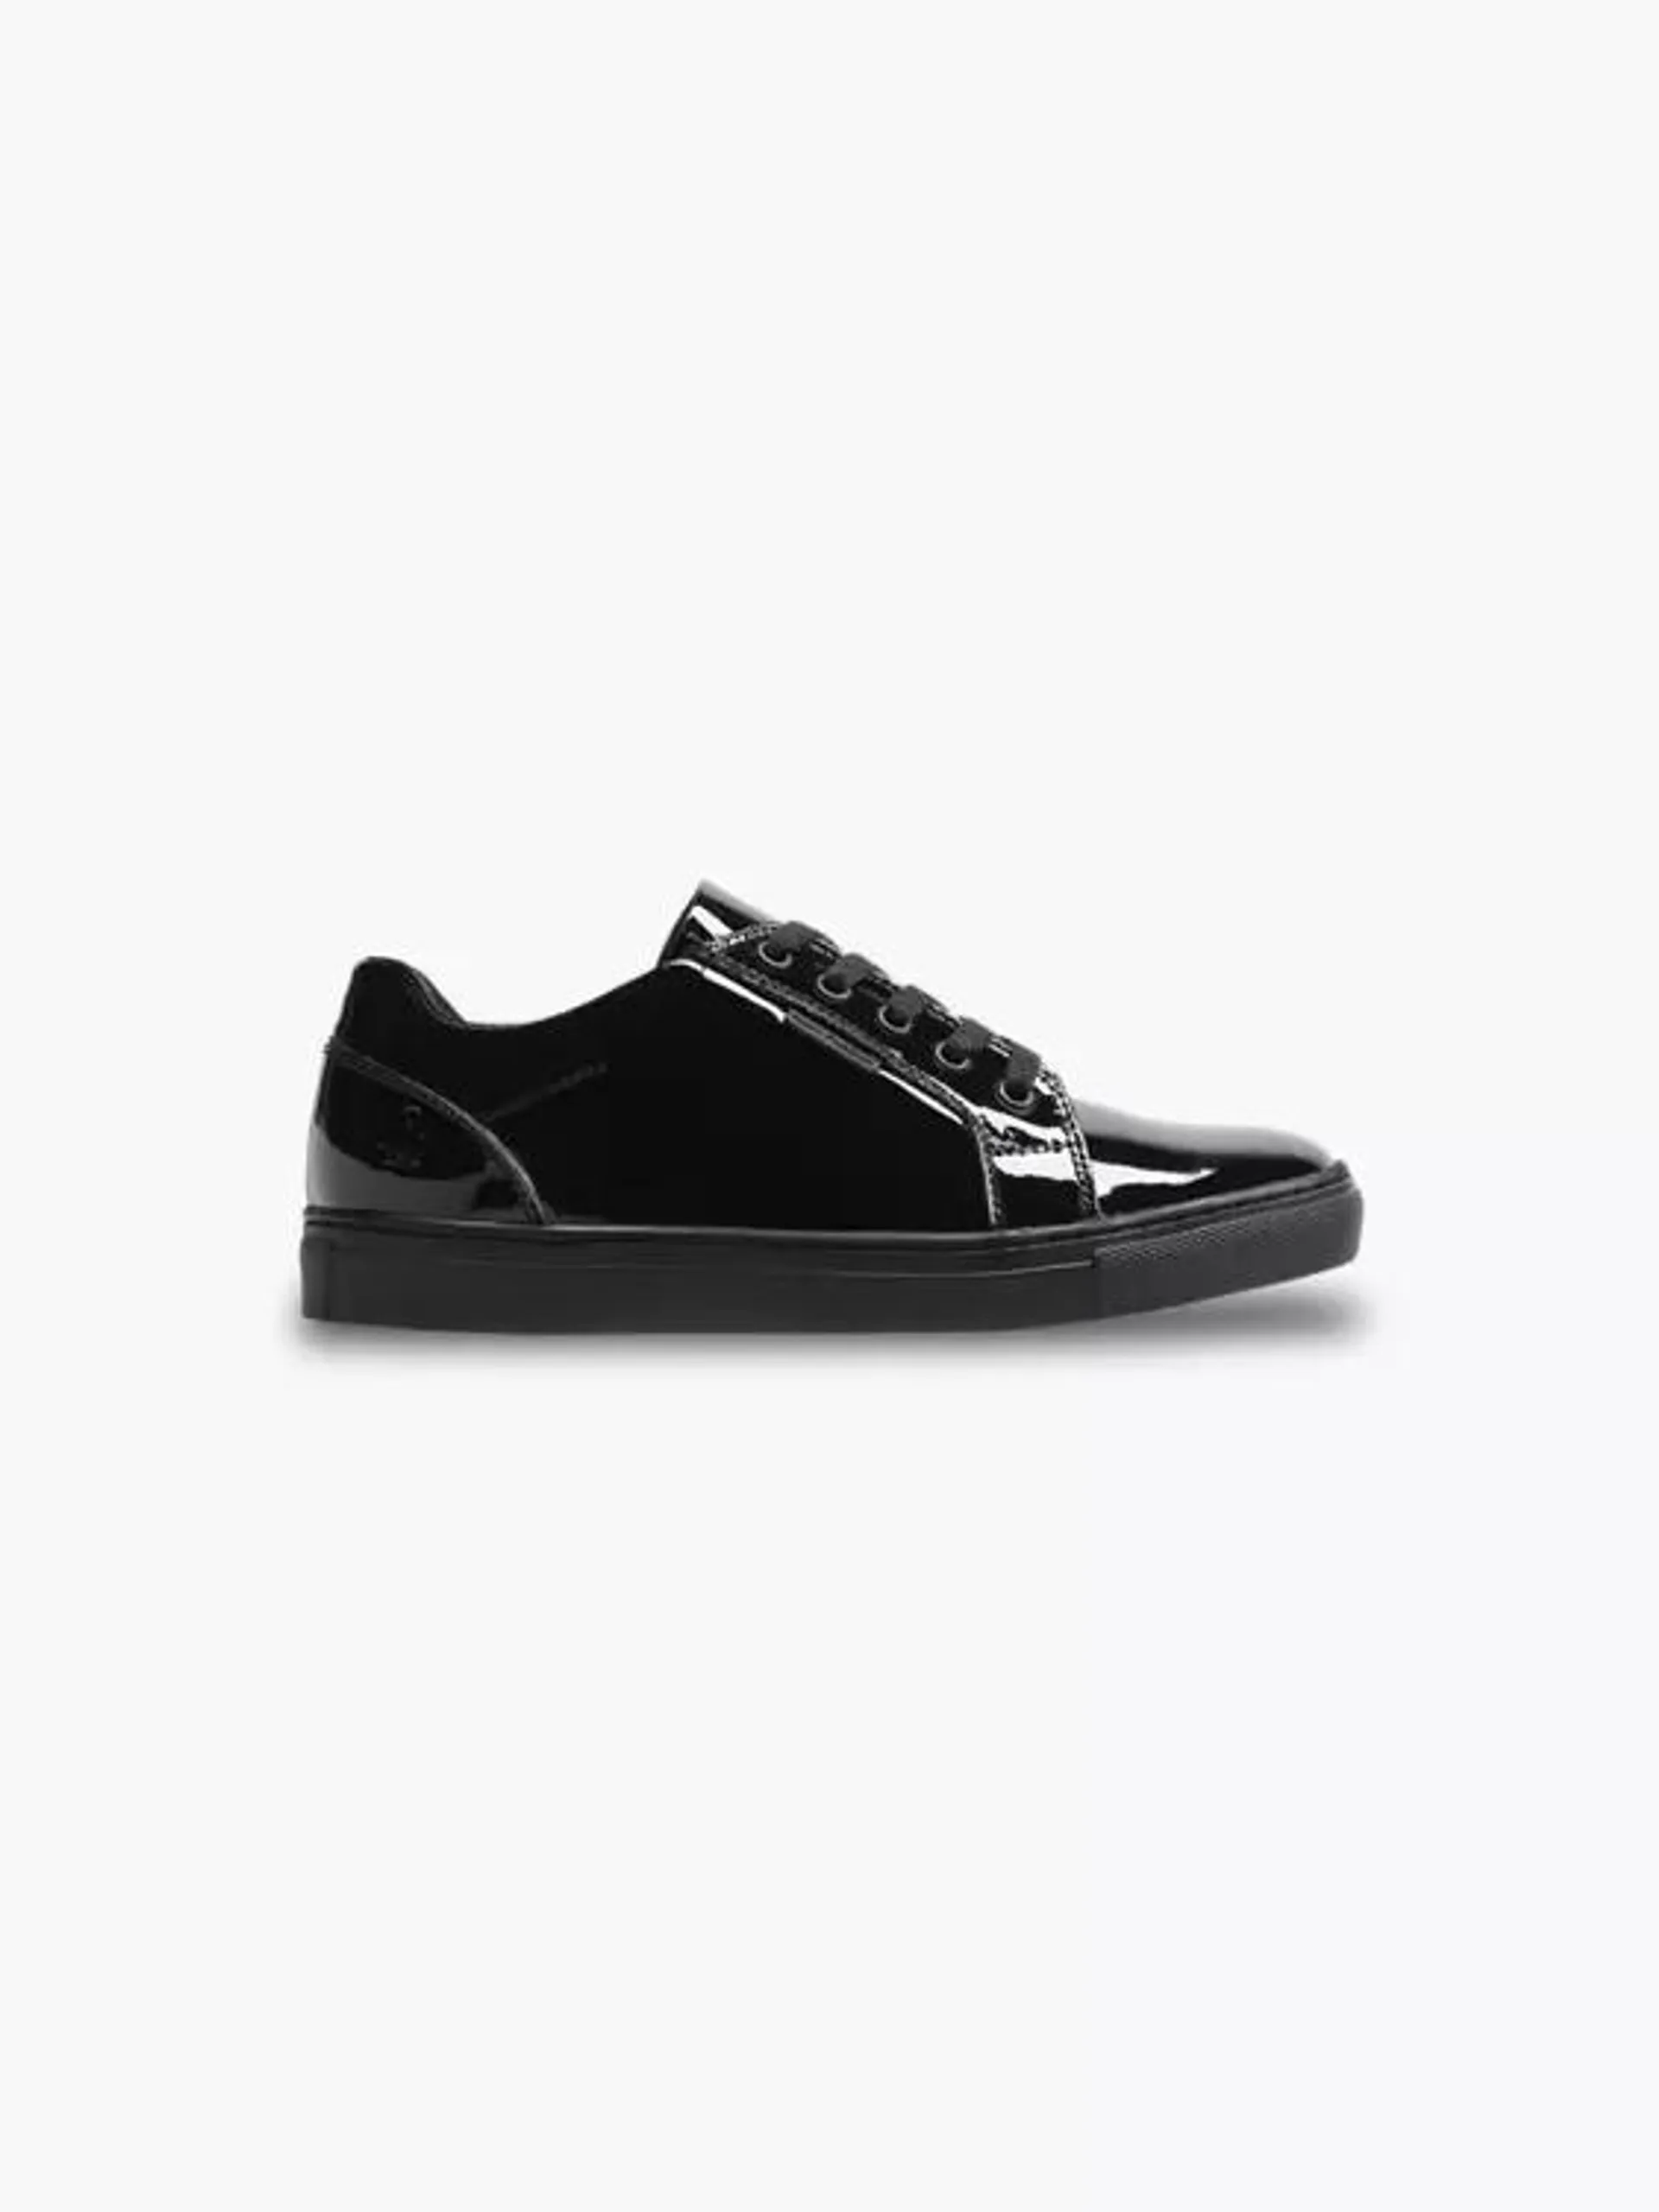 Hush Puppies Teen Girl Black Patent Leather School Shoes